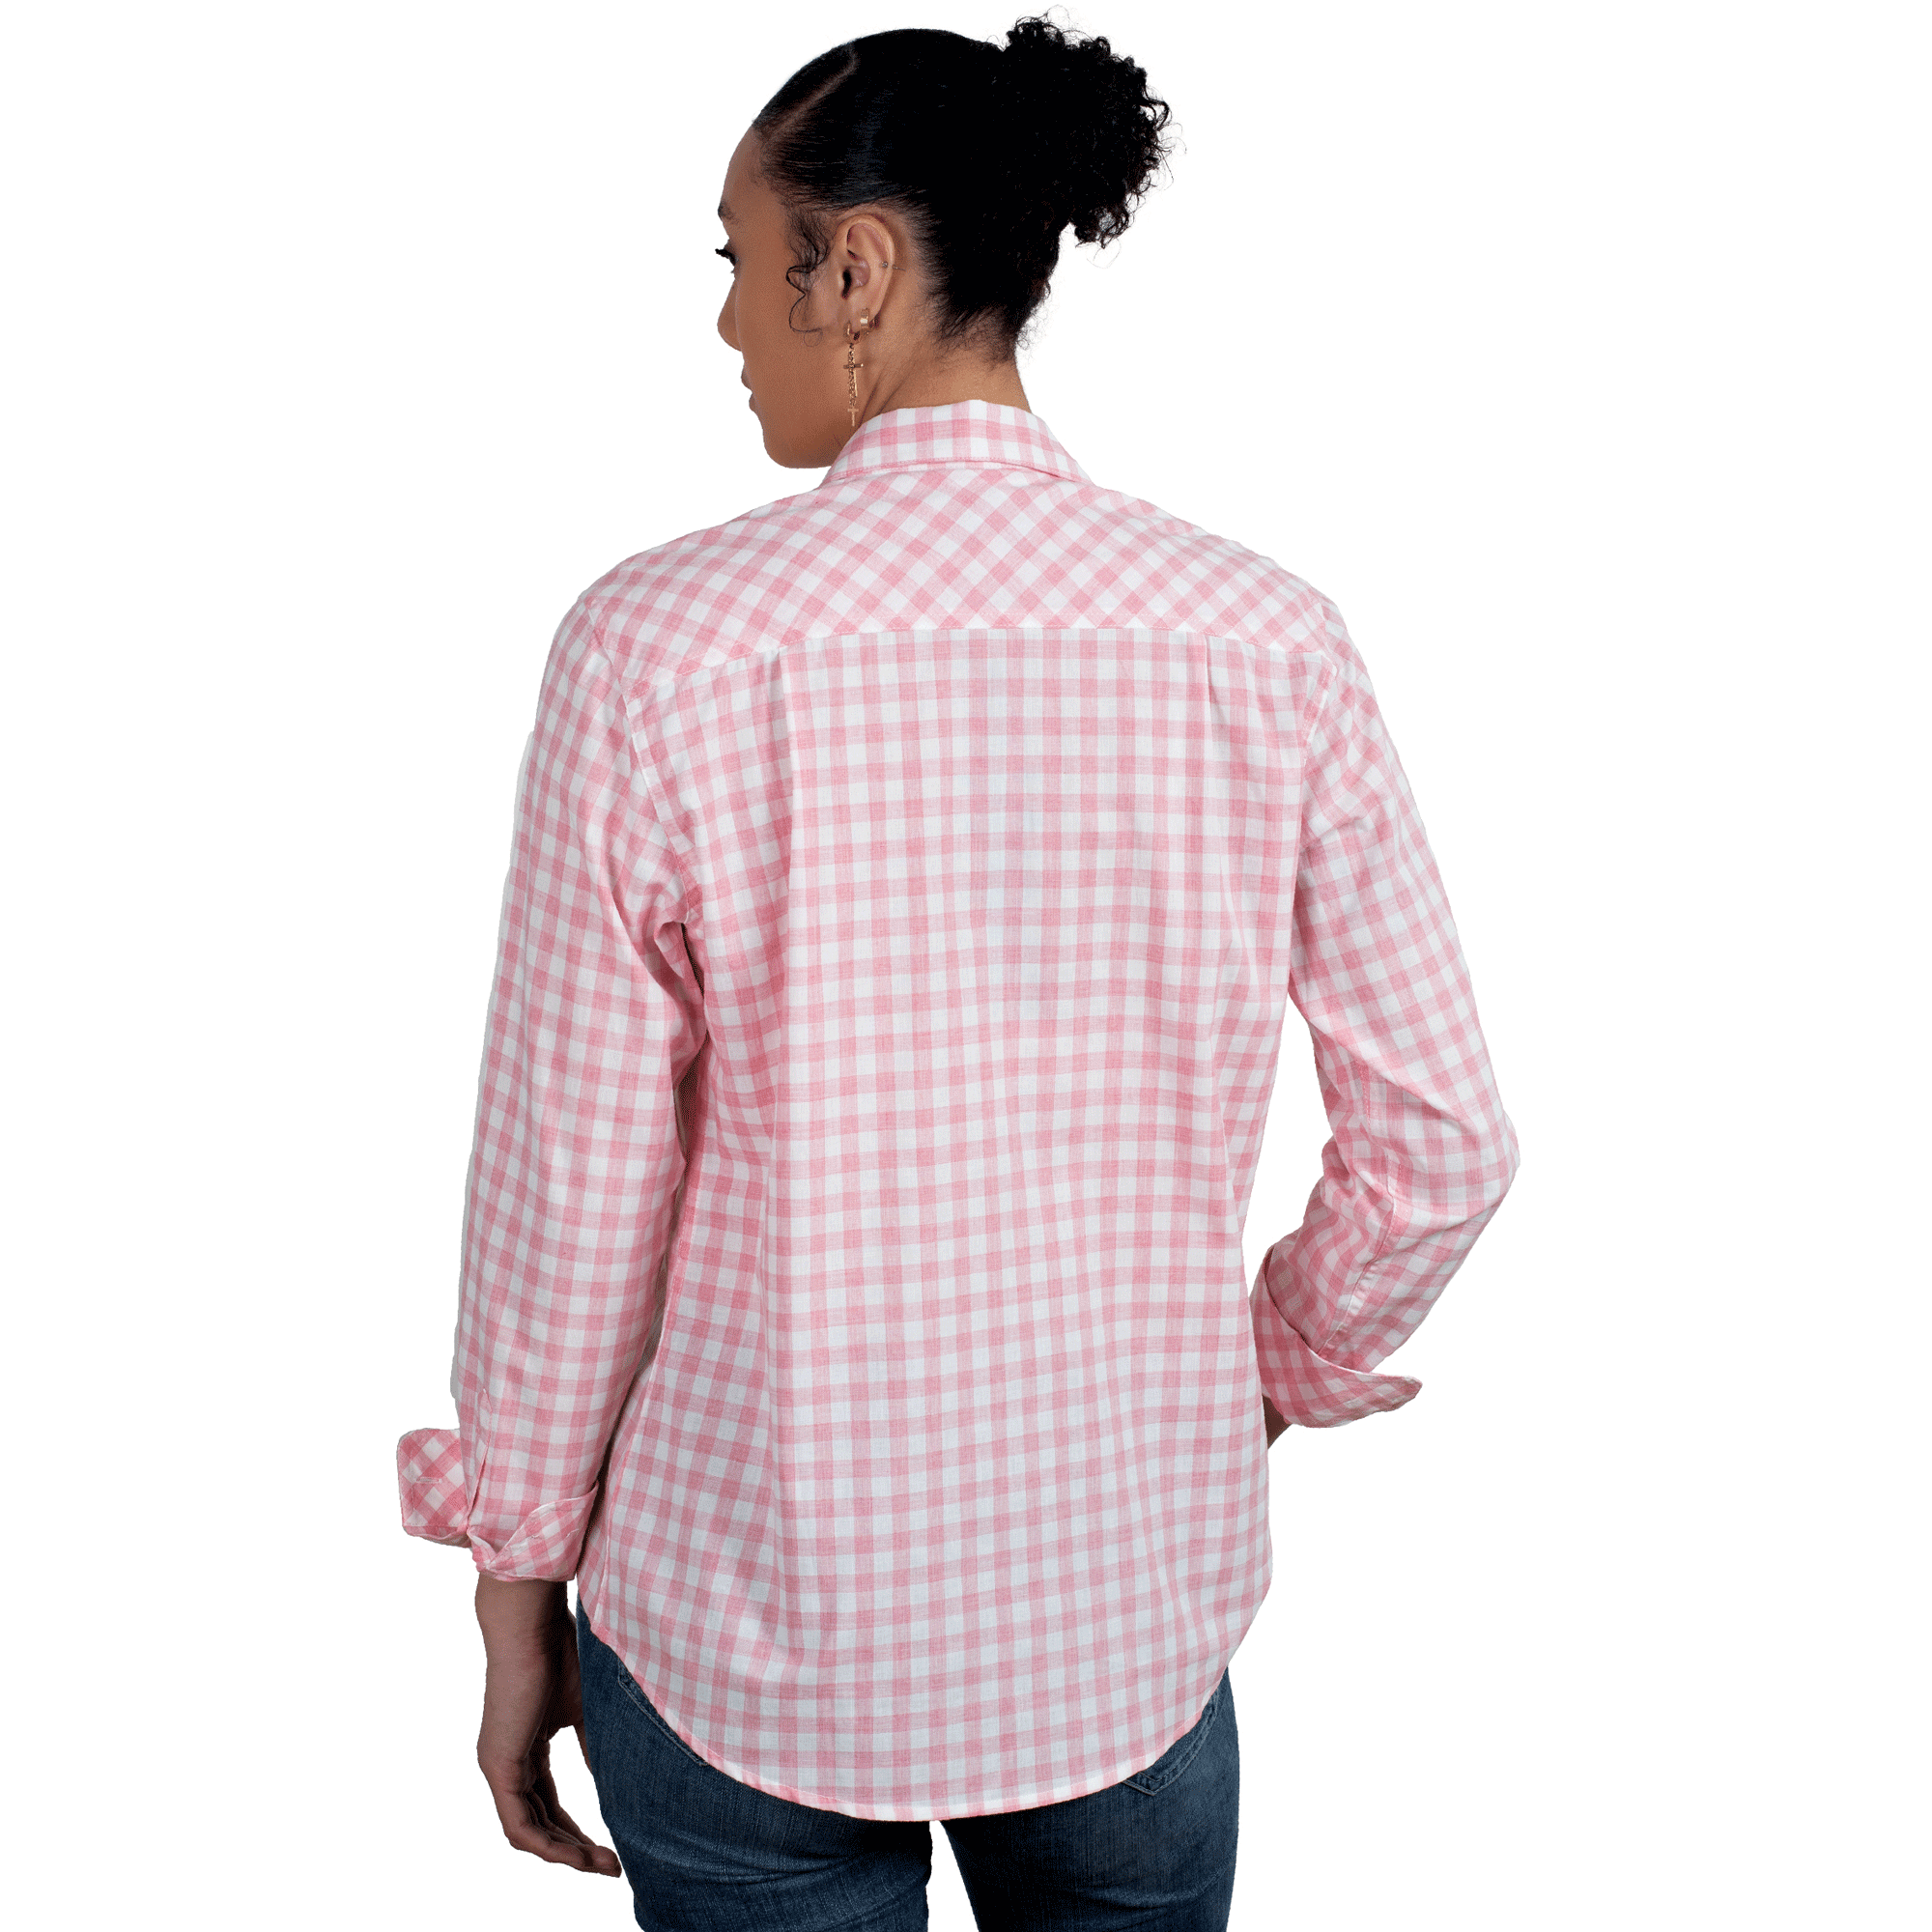 Just Country Wms Abbey Full Button Print Workshirt Flamingo Pink Check